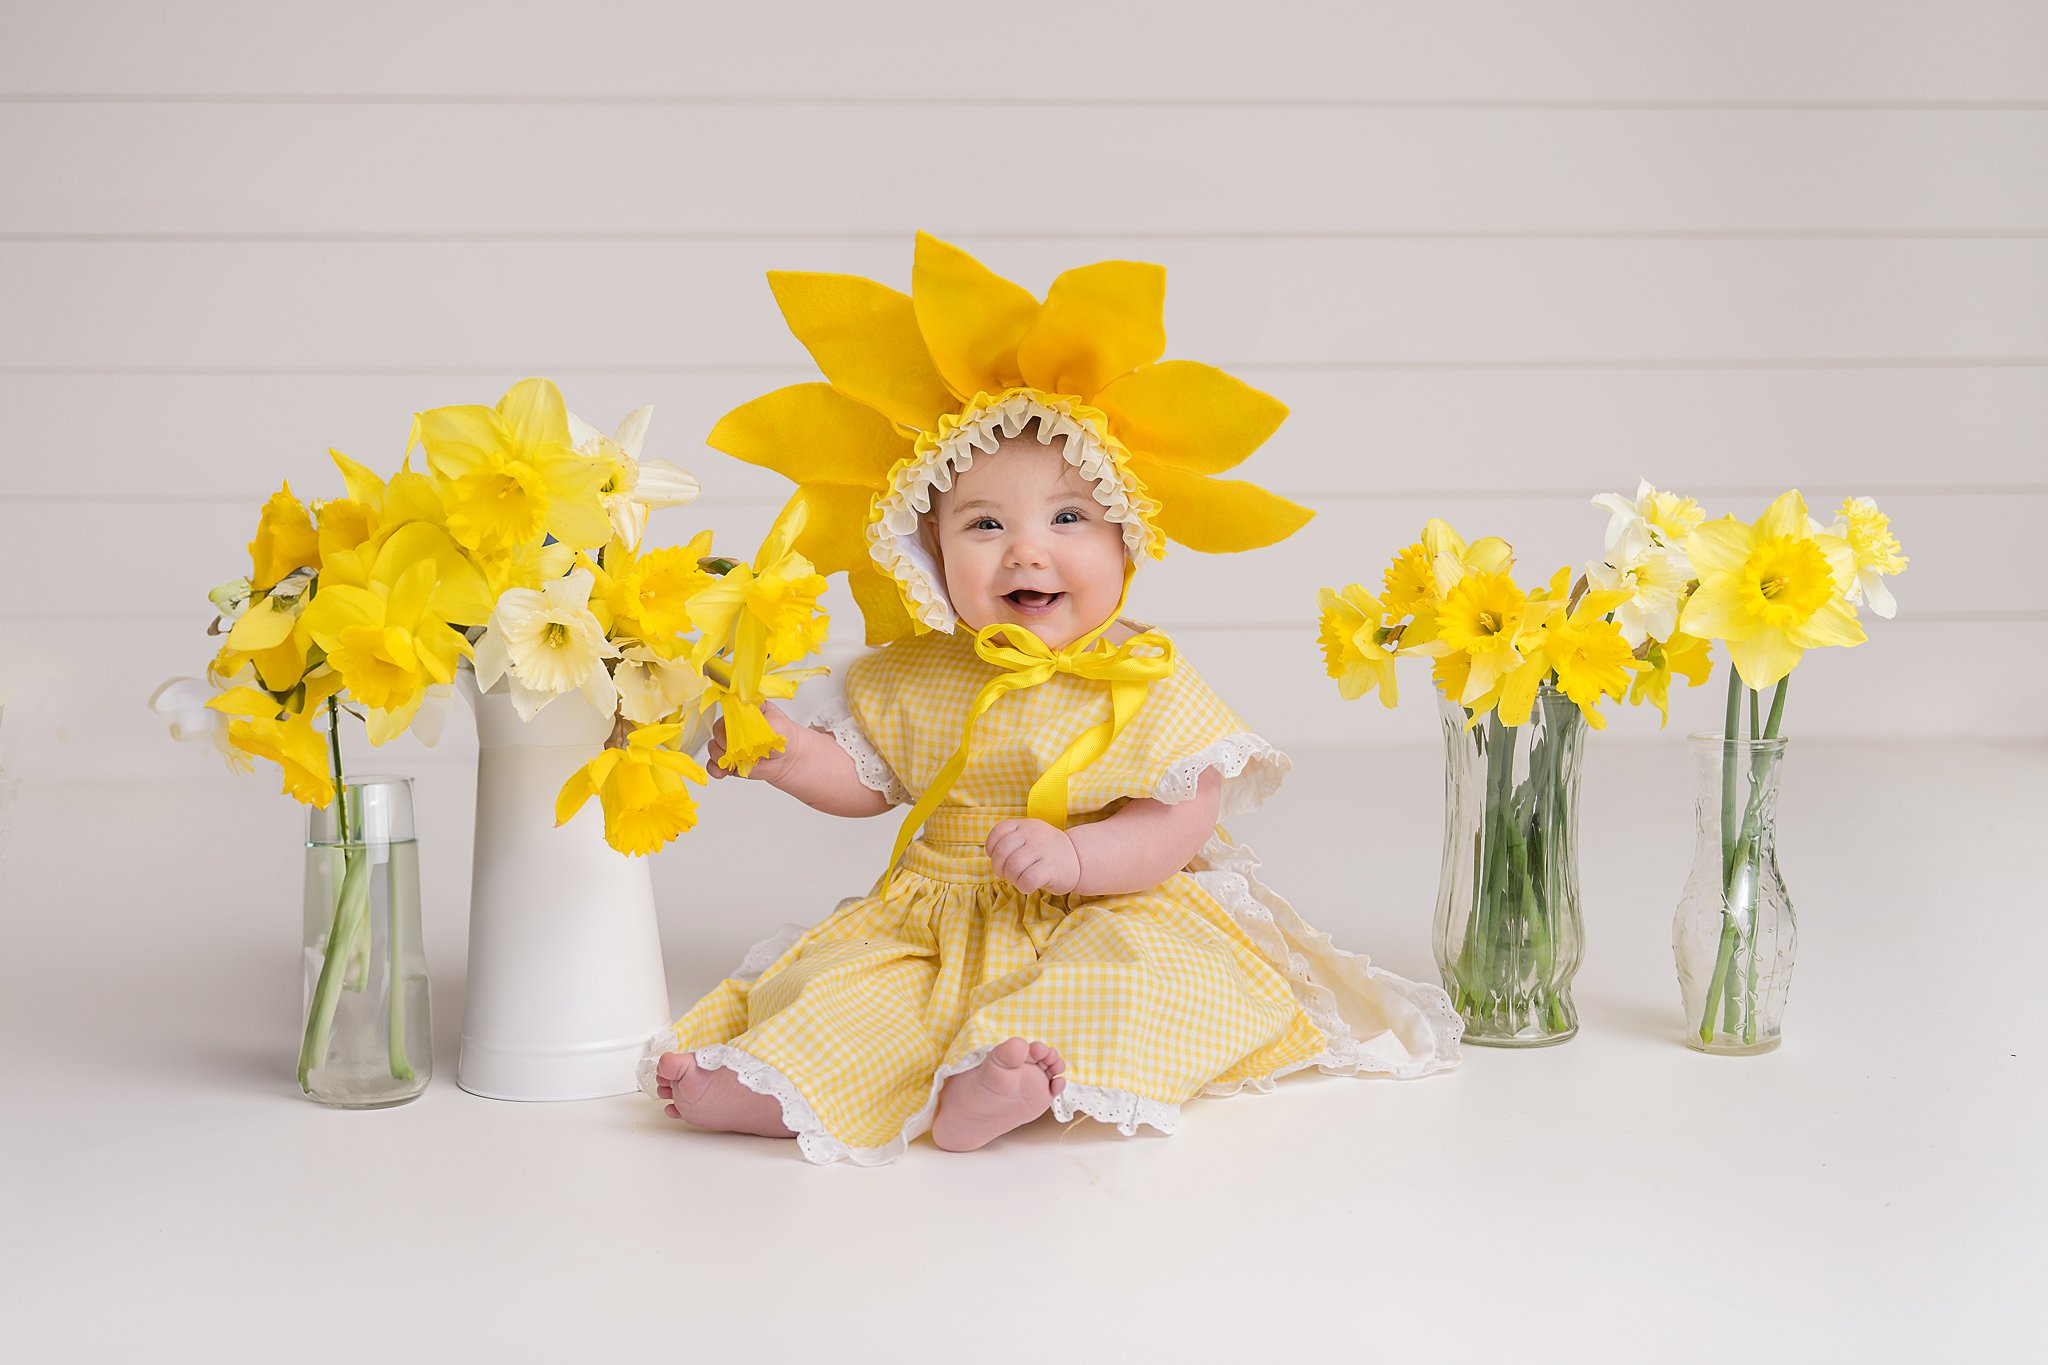 sitting baby in yellow dress and hat on white background with vases and buckets of daffodils beside her